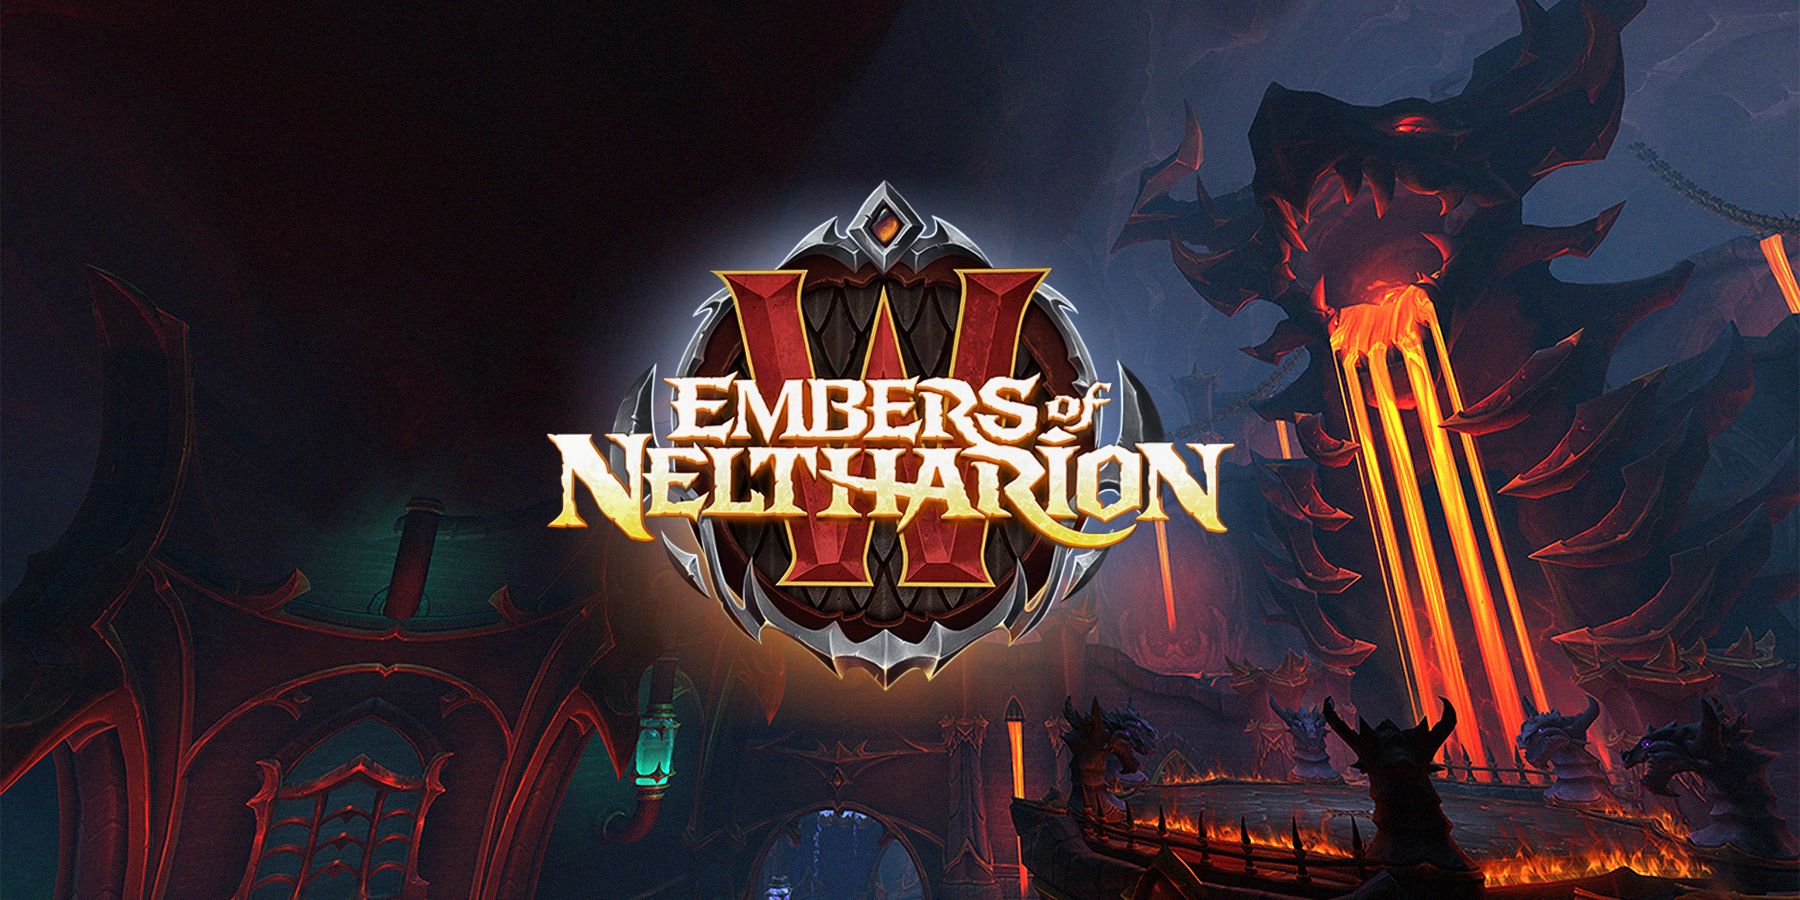 wow world of warcraft embers of neltharion twitch drops 10.1 patch